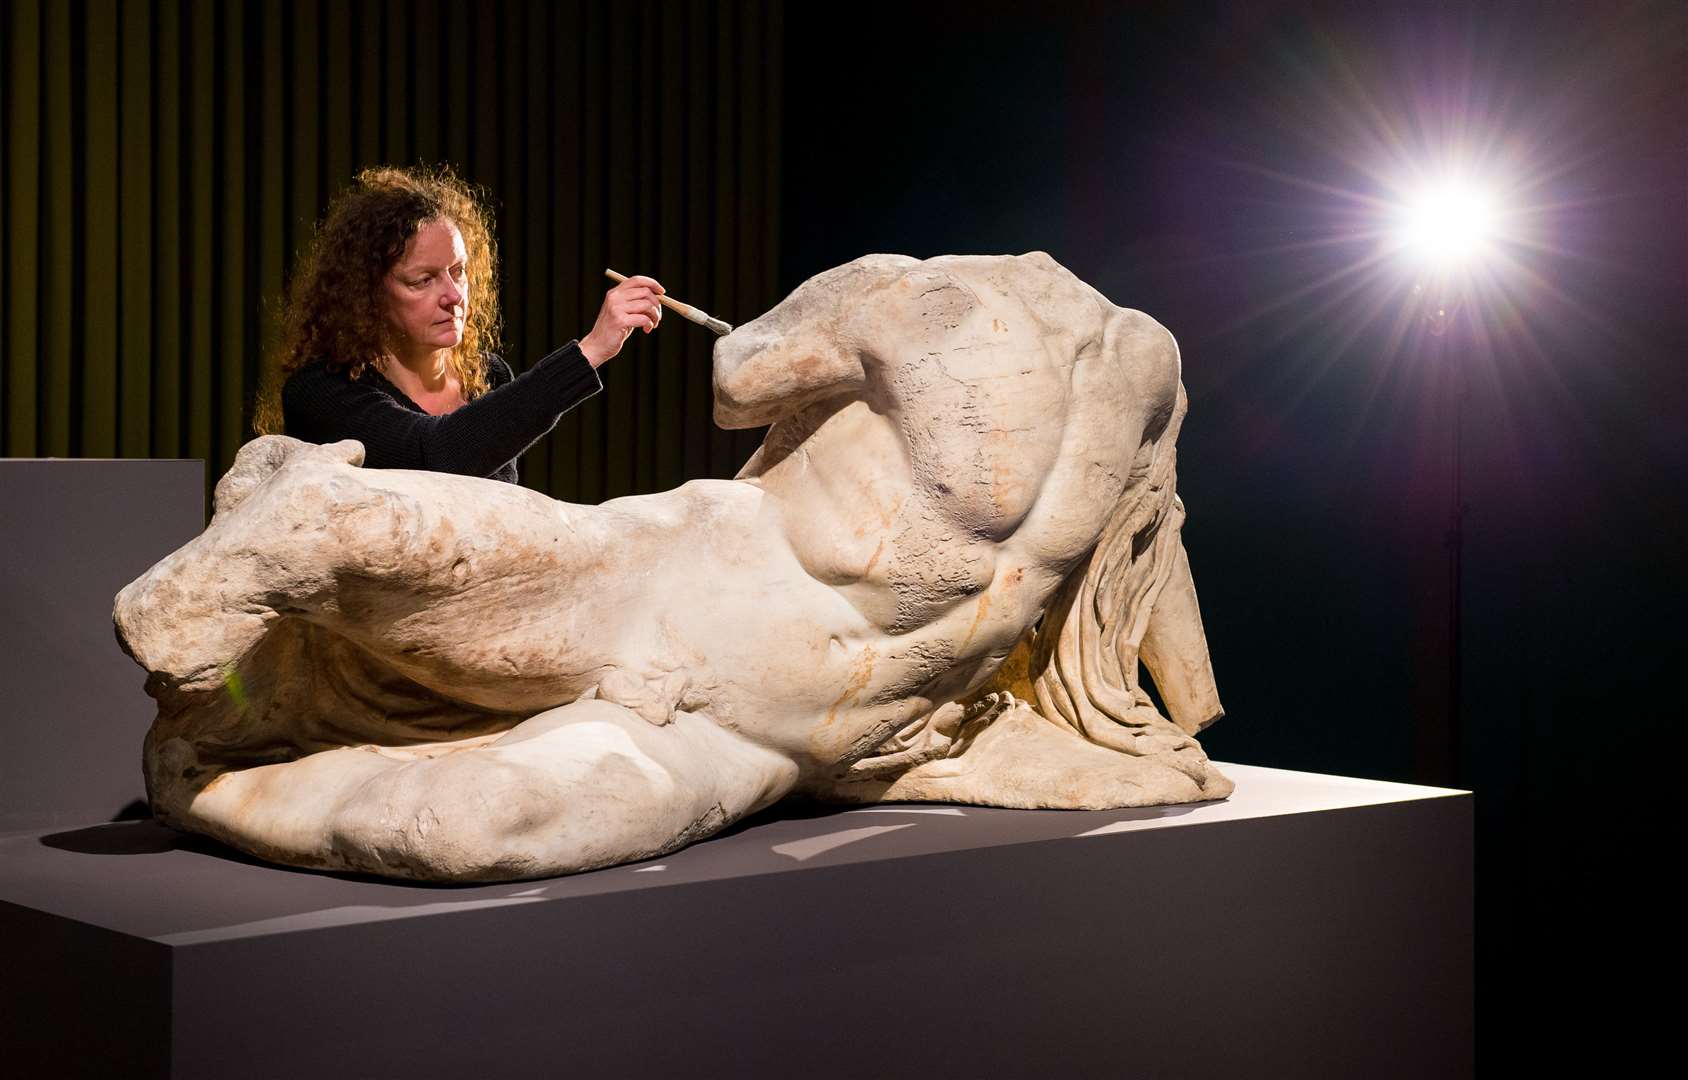 Senior conservator Karen Birkhoelzer is seen with the sculpture The River God Ilissos by Phidias, part of the so-called Elgin marbles (Dominic Lipinski/PA)